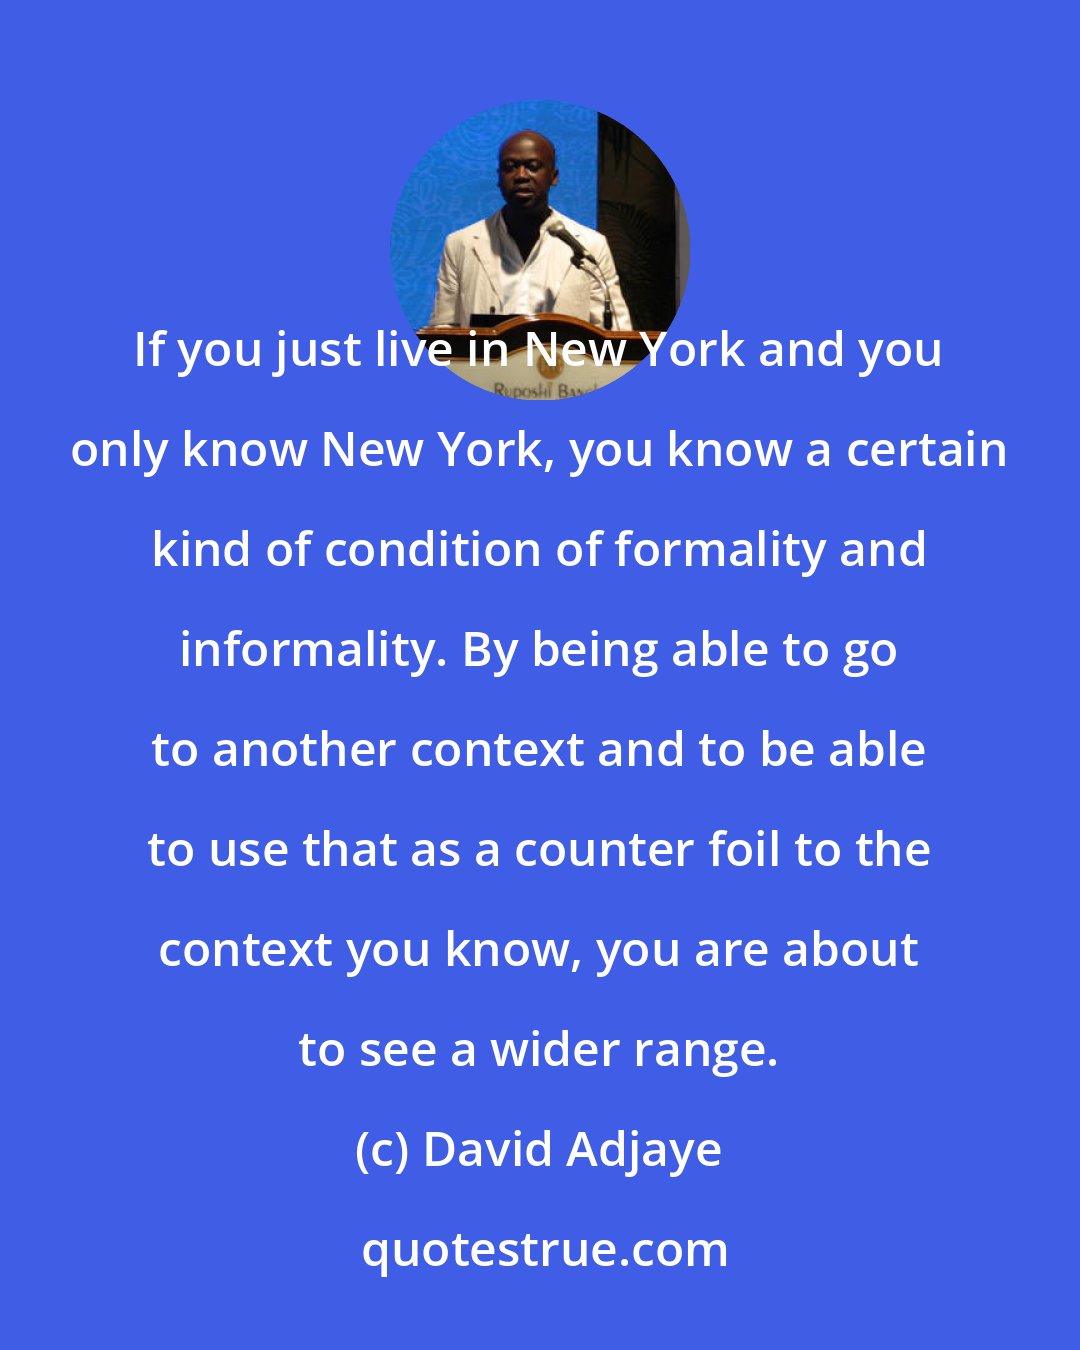 David Adjaye: If you just live in New York and you only know New York, you know a certain kind of condition of formality and informality. By being able to go to another context and to be able to use that as a counter foil to the context you know, you are about to see a wider range.